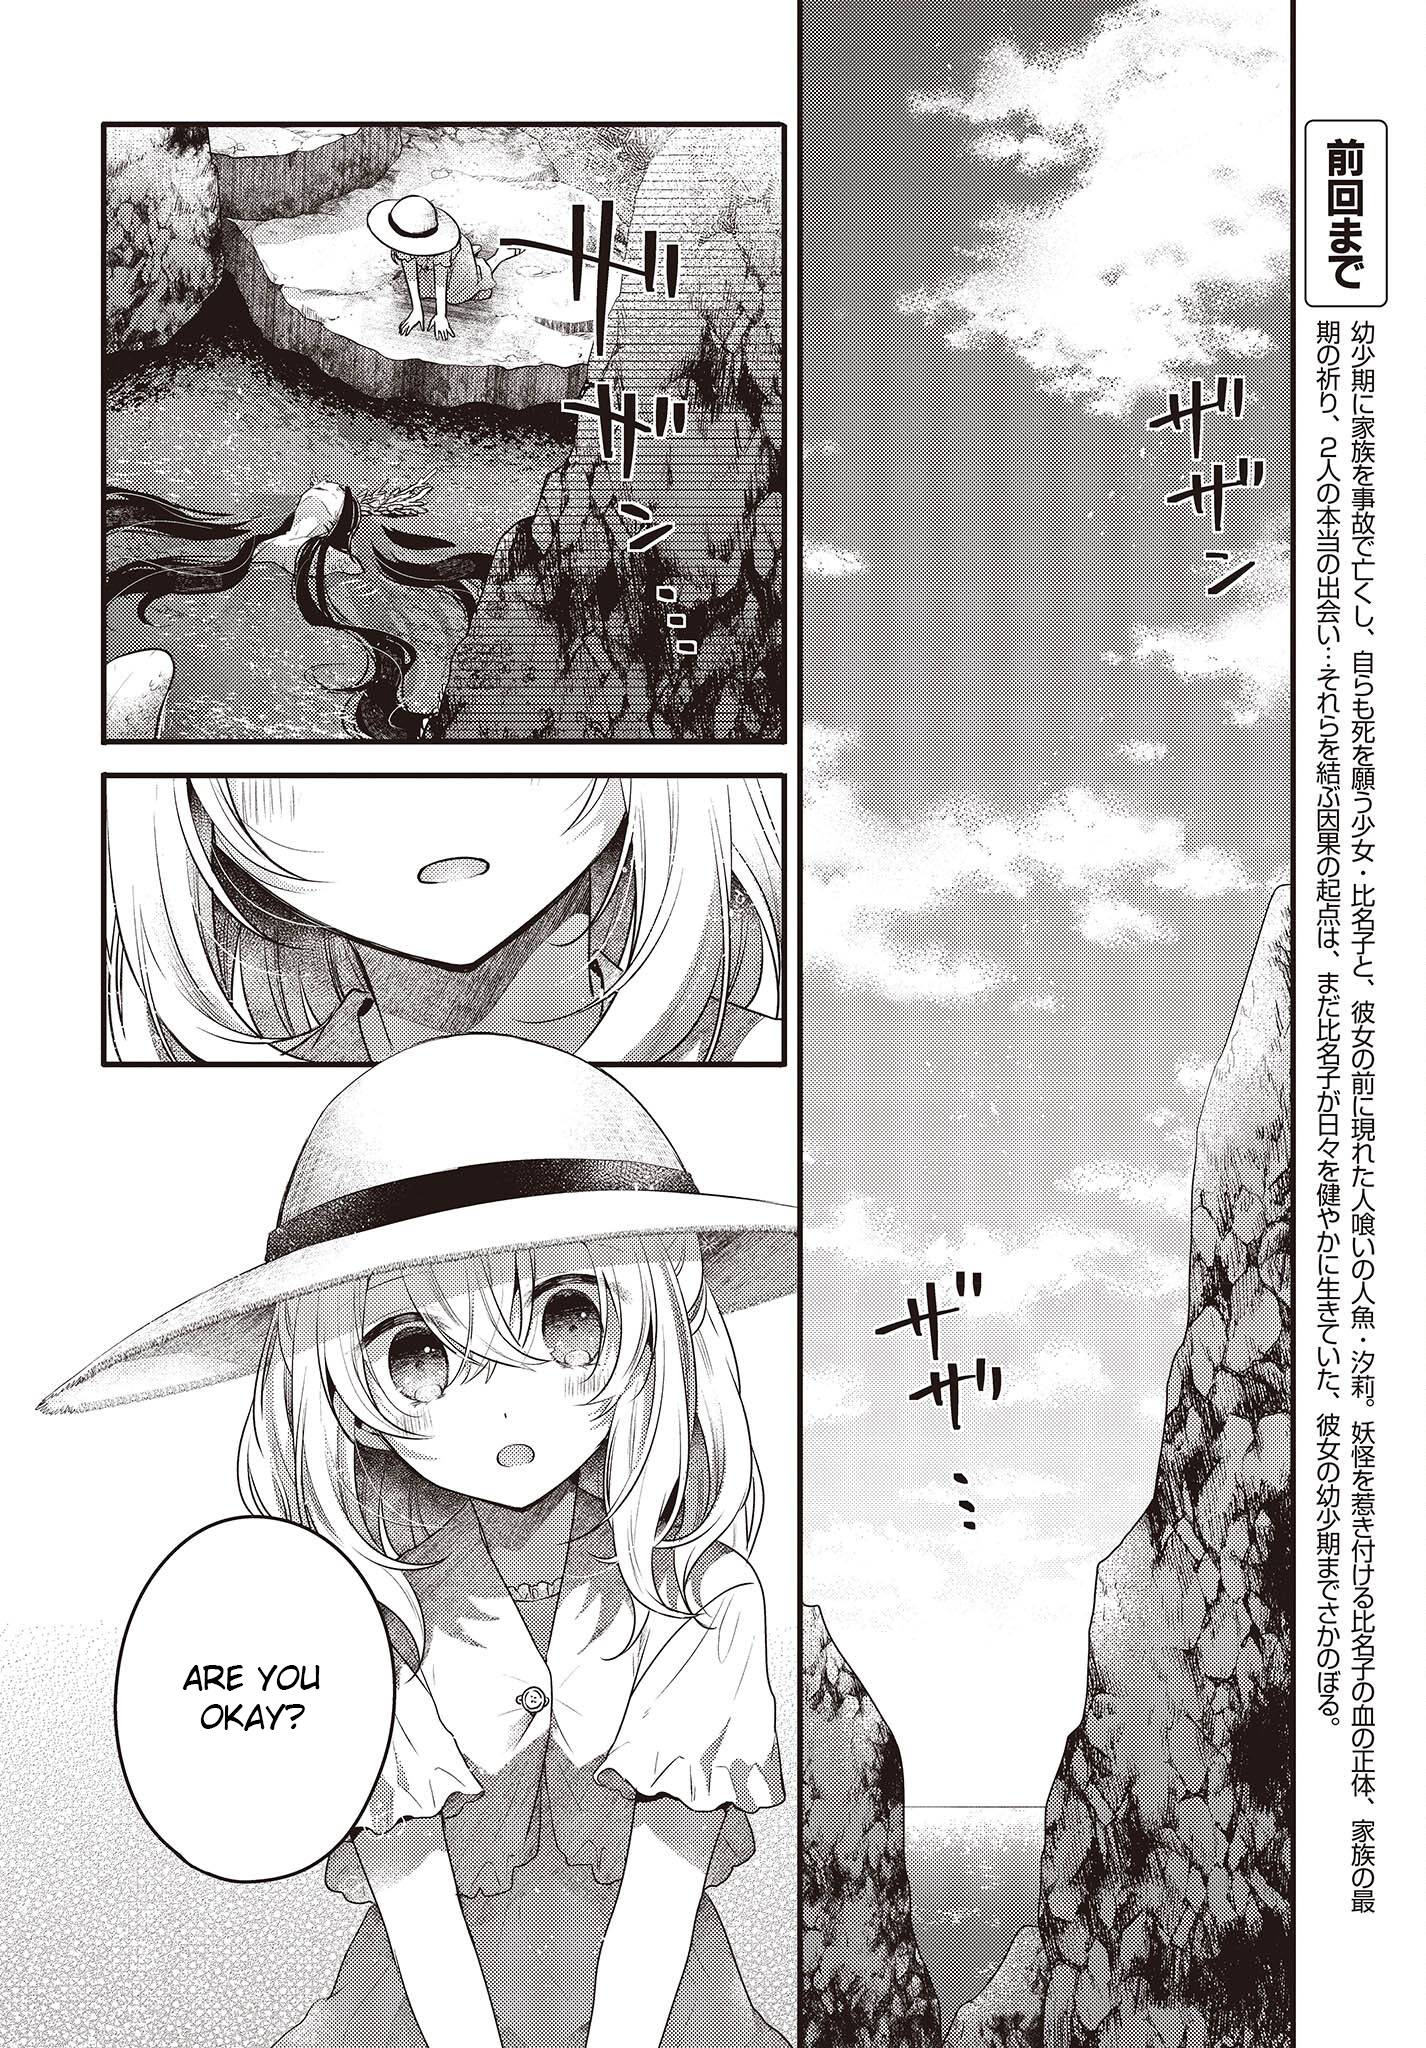 A Monster Wants To Eat Me - chapter 24 - #4